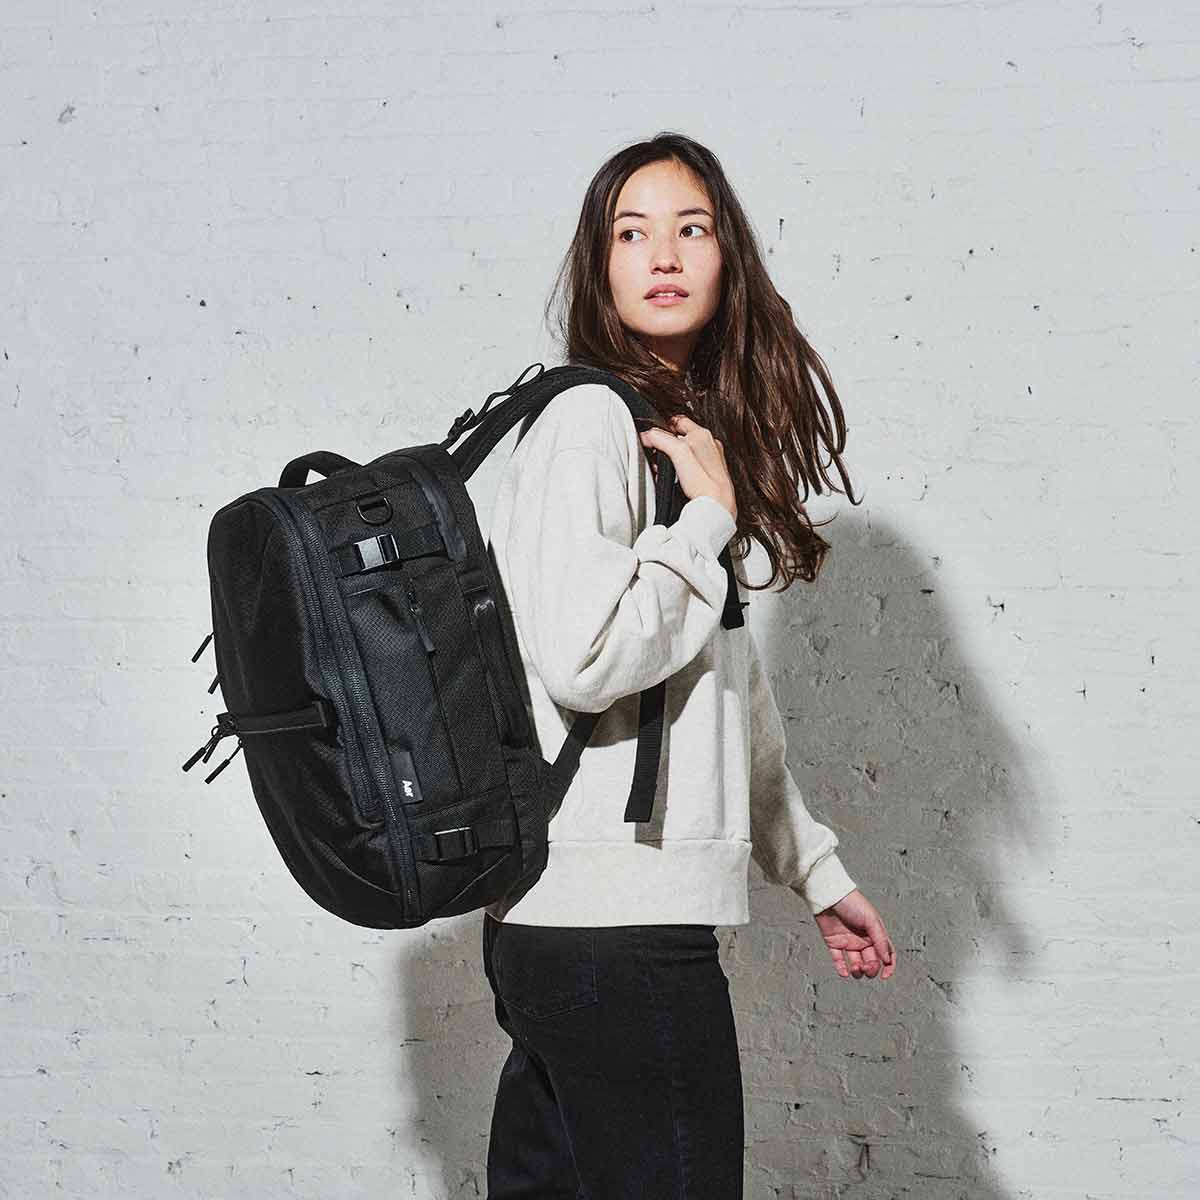 Travel Pack 3 Small Black | Aer ｜ エアー公式通販サイト